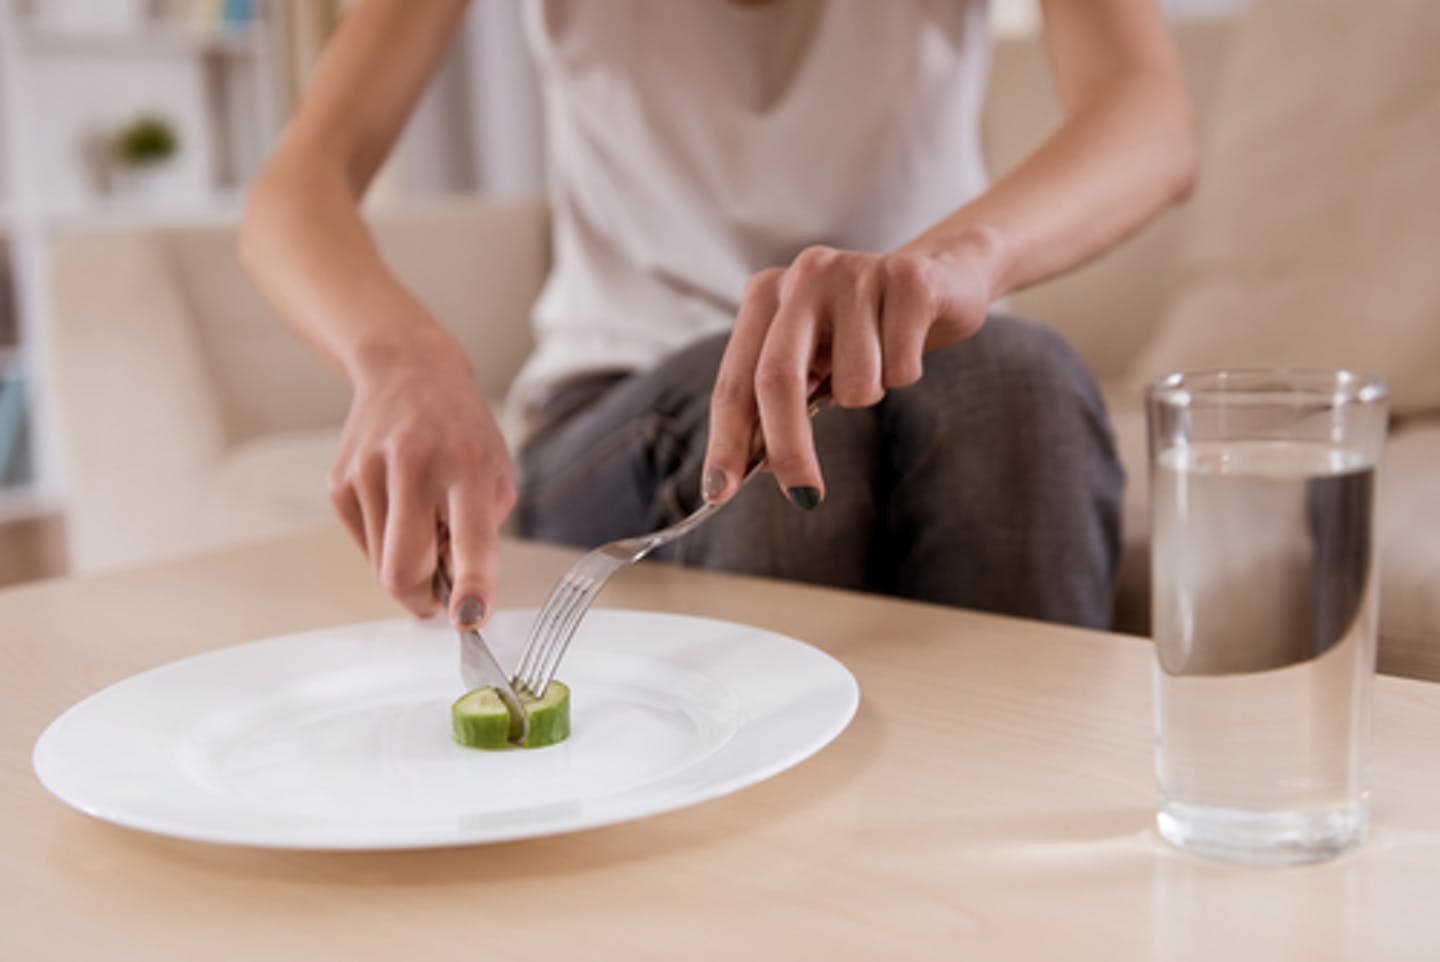 Eating disorders are difficult to overcome, but it is very important to eat diets